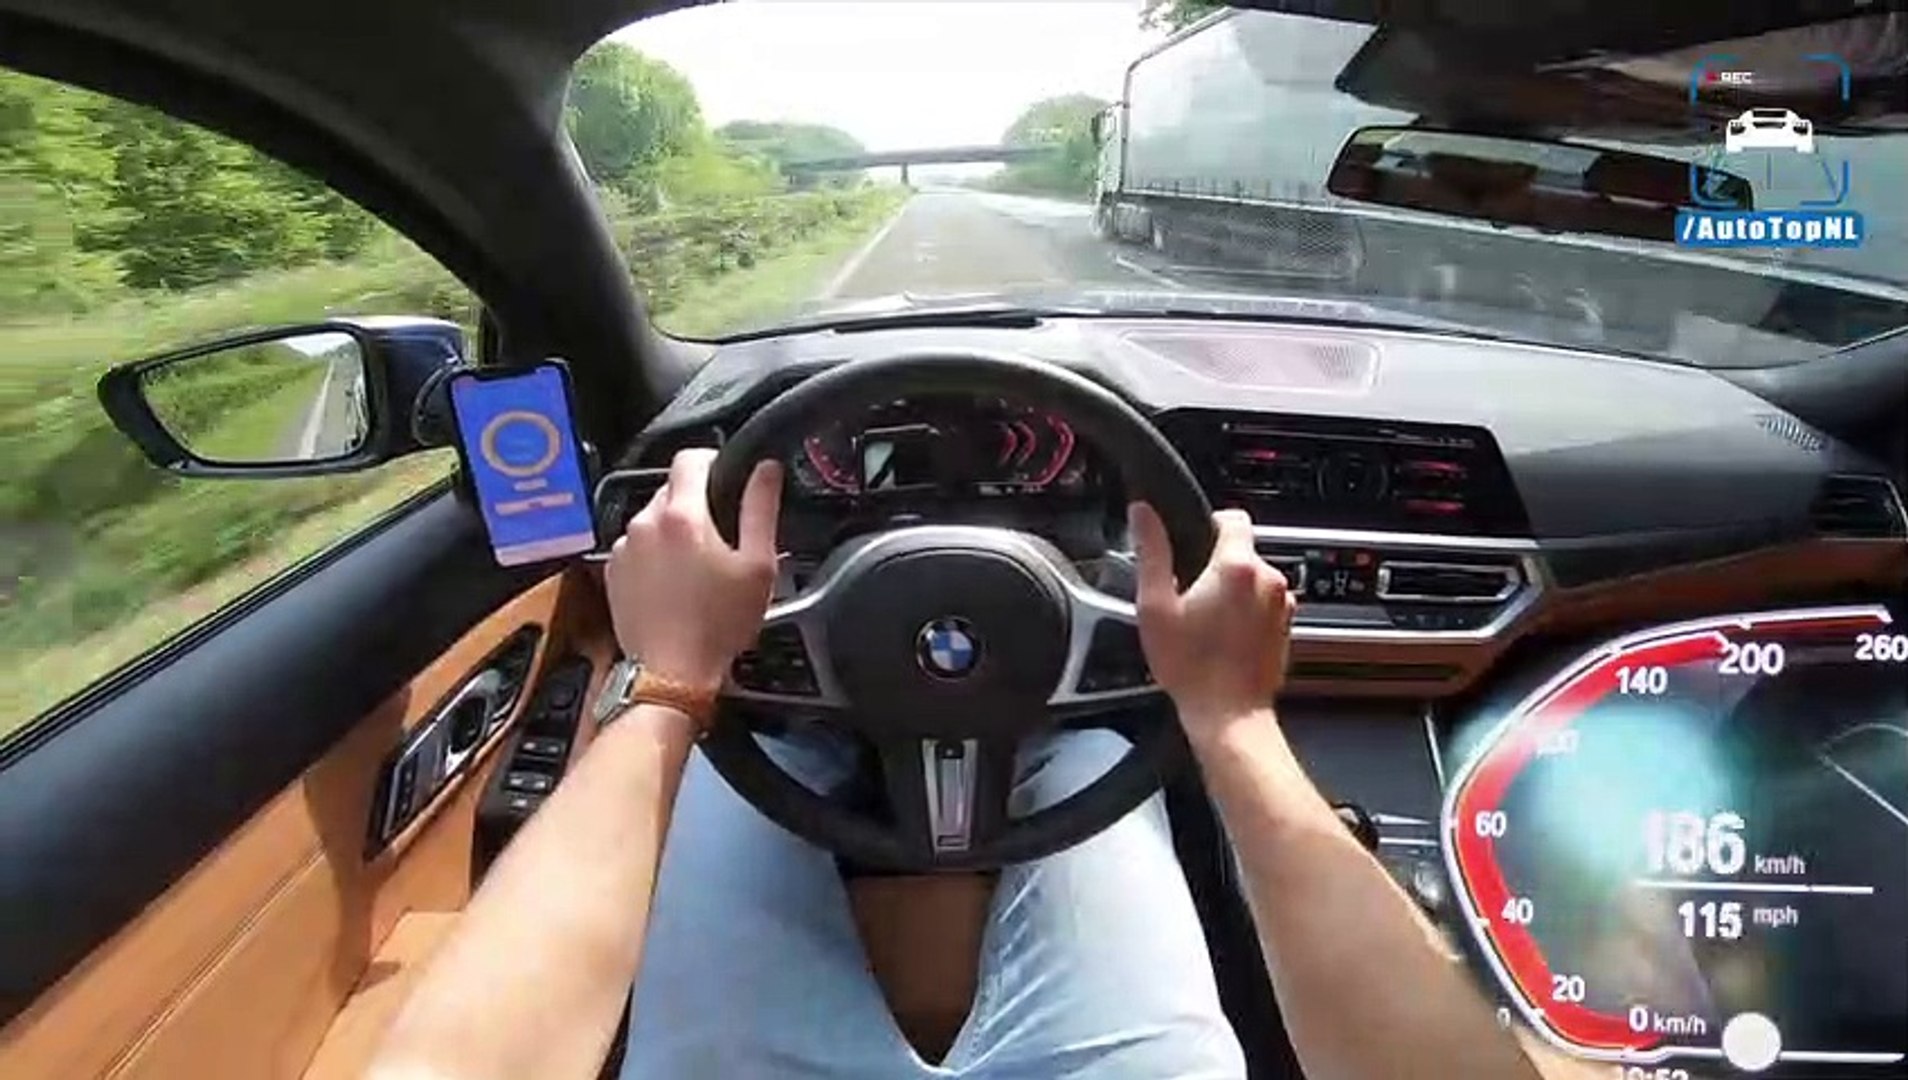 BMW 3 Series G20 330i AUTOBAHN POV 261KM/H | 161MPH TOP SPEED by AutoTopNL  - Dailymotion Video